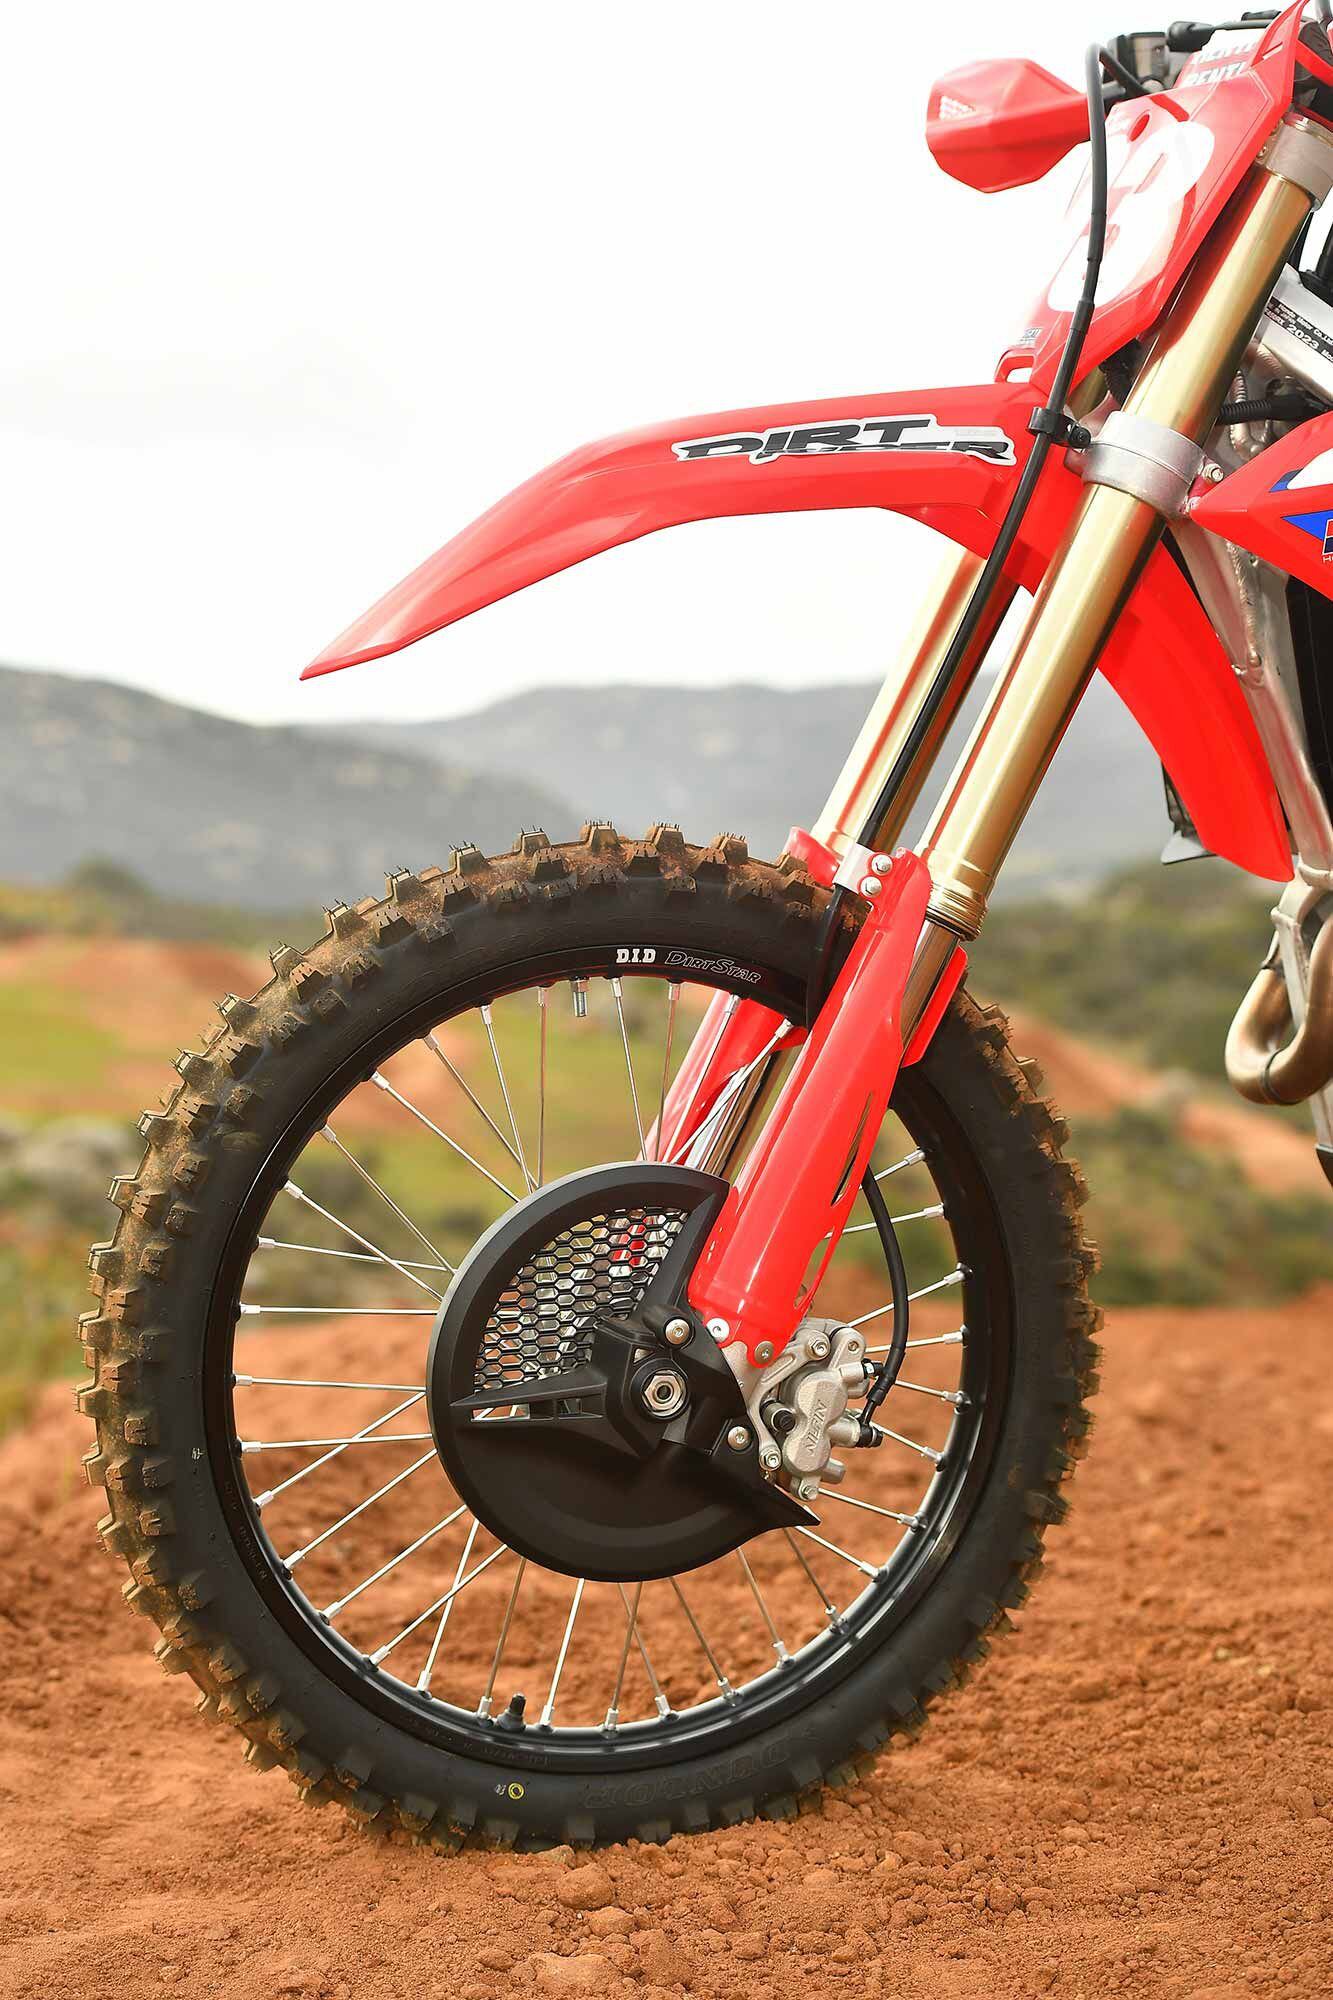 Proper front brake disc protection, D.I.D DirtStar rims, and Dunlop Geomax AT81 tires on the 2023 Honda CRF450RX. The 4.8 Nm fork springs and RX-specific settings make for a more compliant ride over the motocross-focused CRF450R.